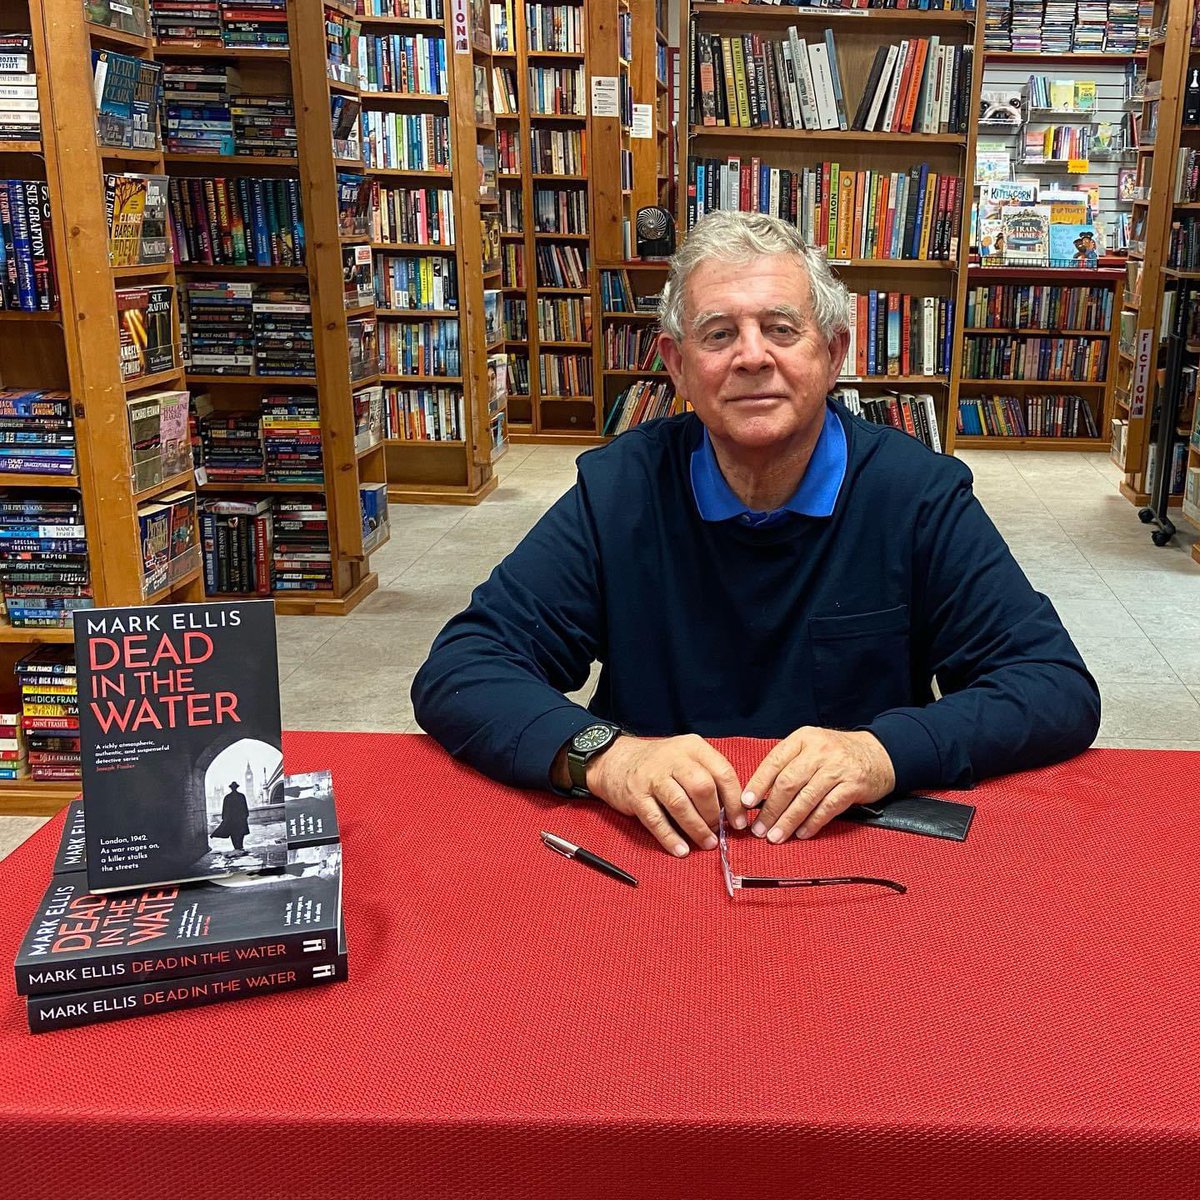 A year ago today, I had the great pleasure of signing copies of #DeadInTheWater (Frank Merlin 5) at the Hockessin BookShelf, a wonderful independent bookshop just outside Wilmington, Delaware. 
#historicalcrime #WW2 #FrankMerlin